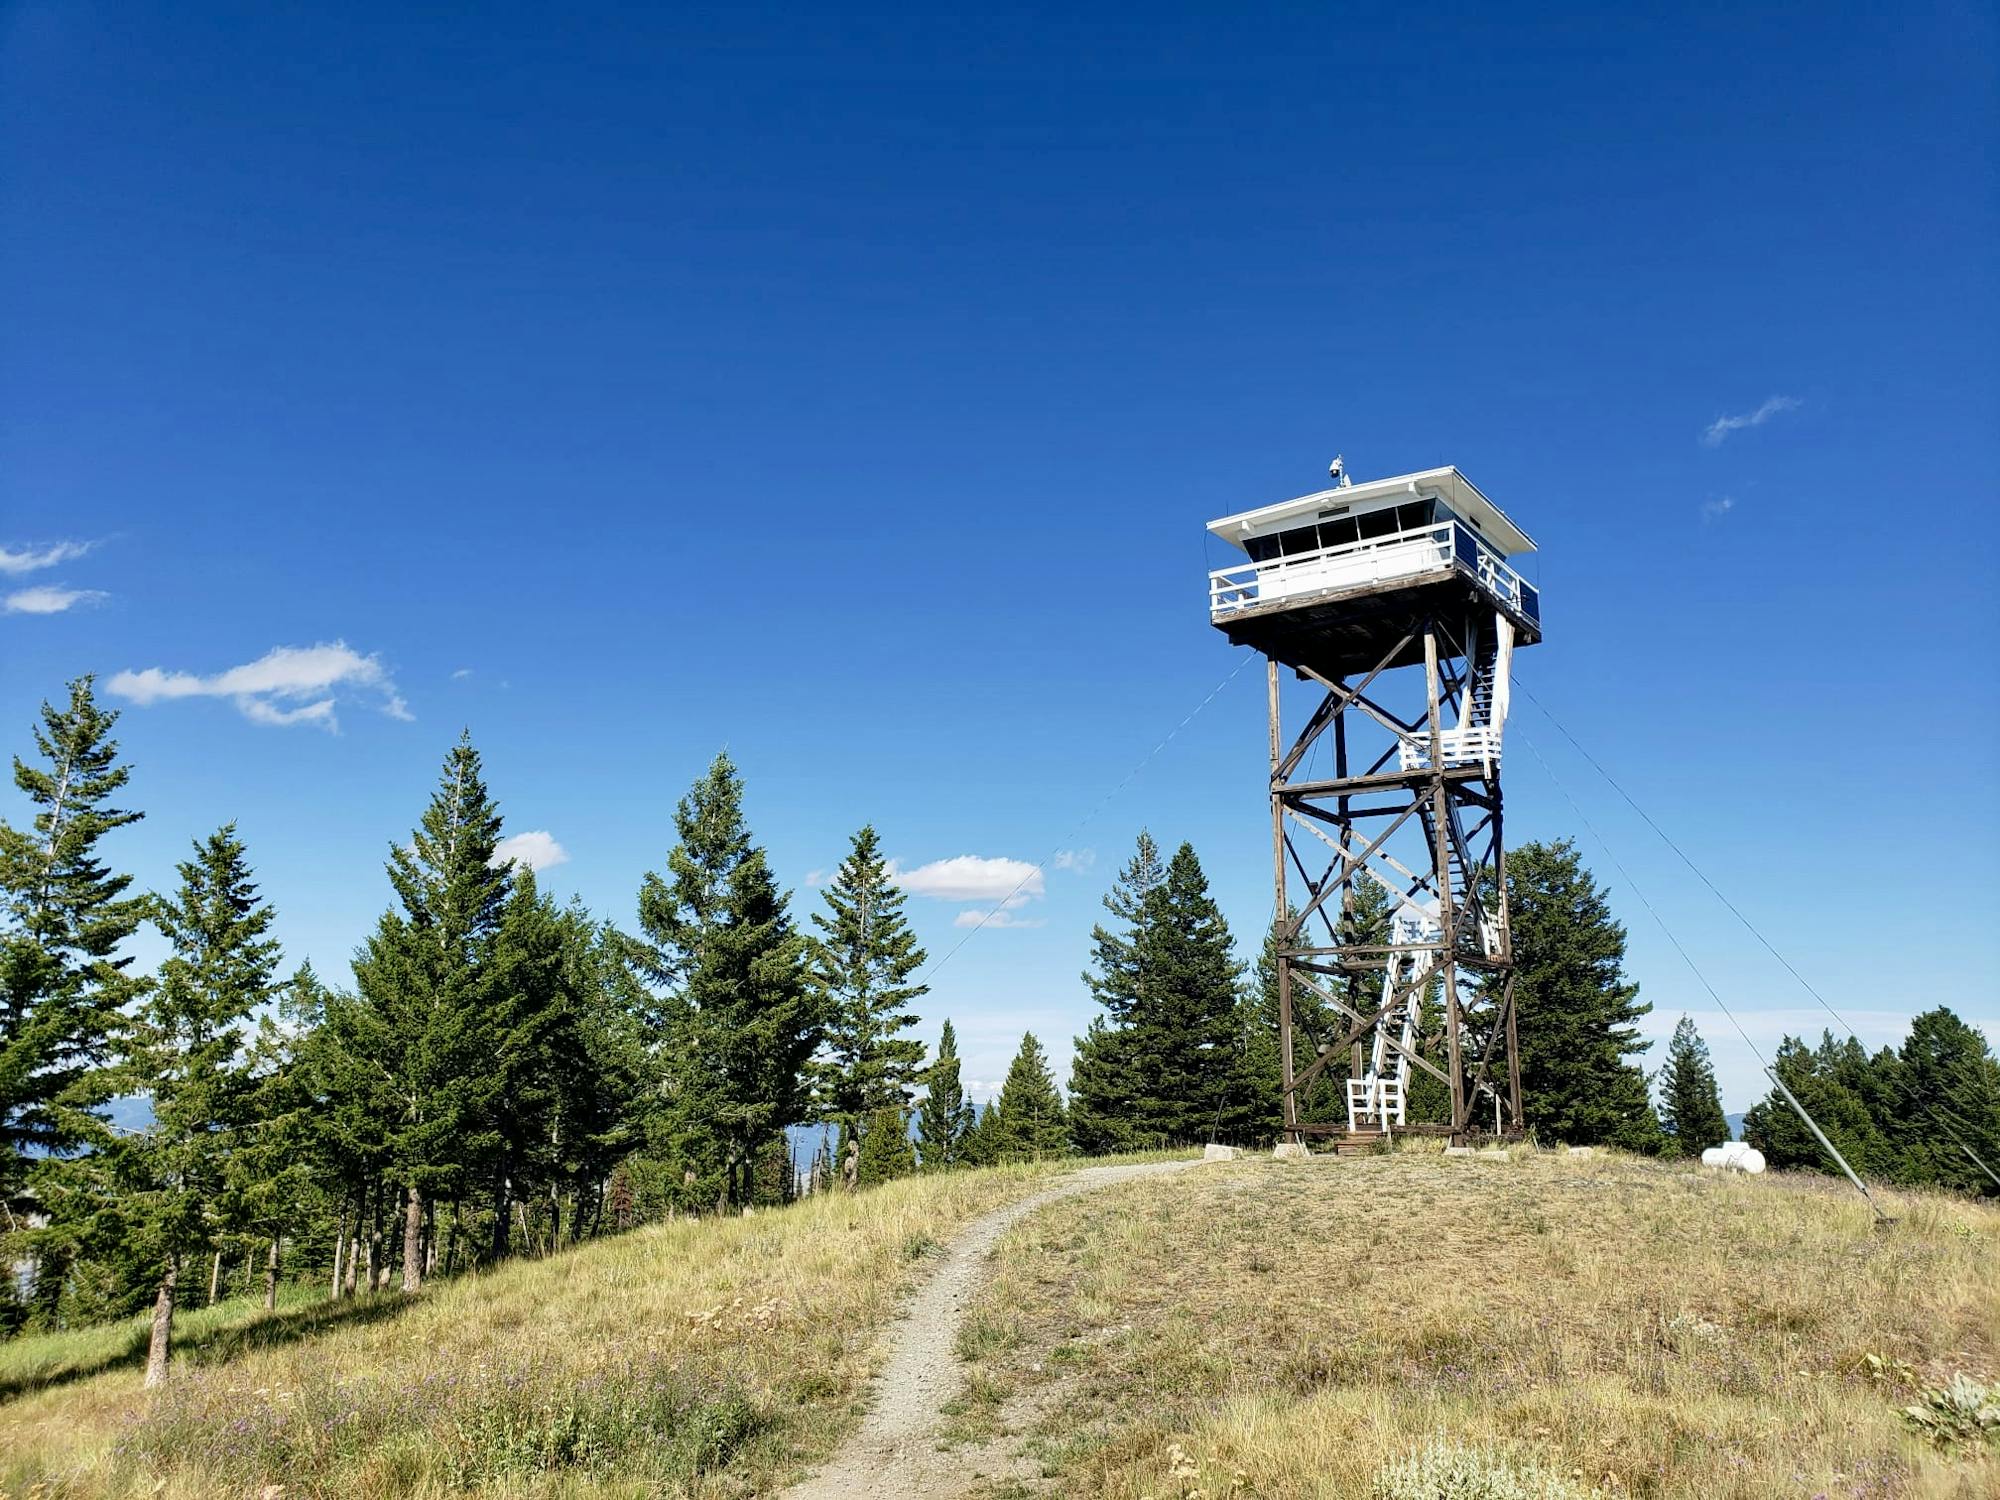 The summit lookout tower